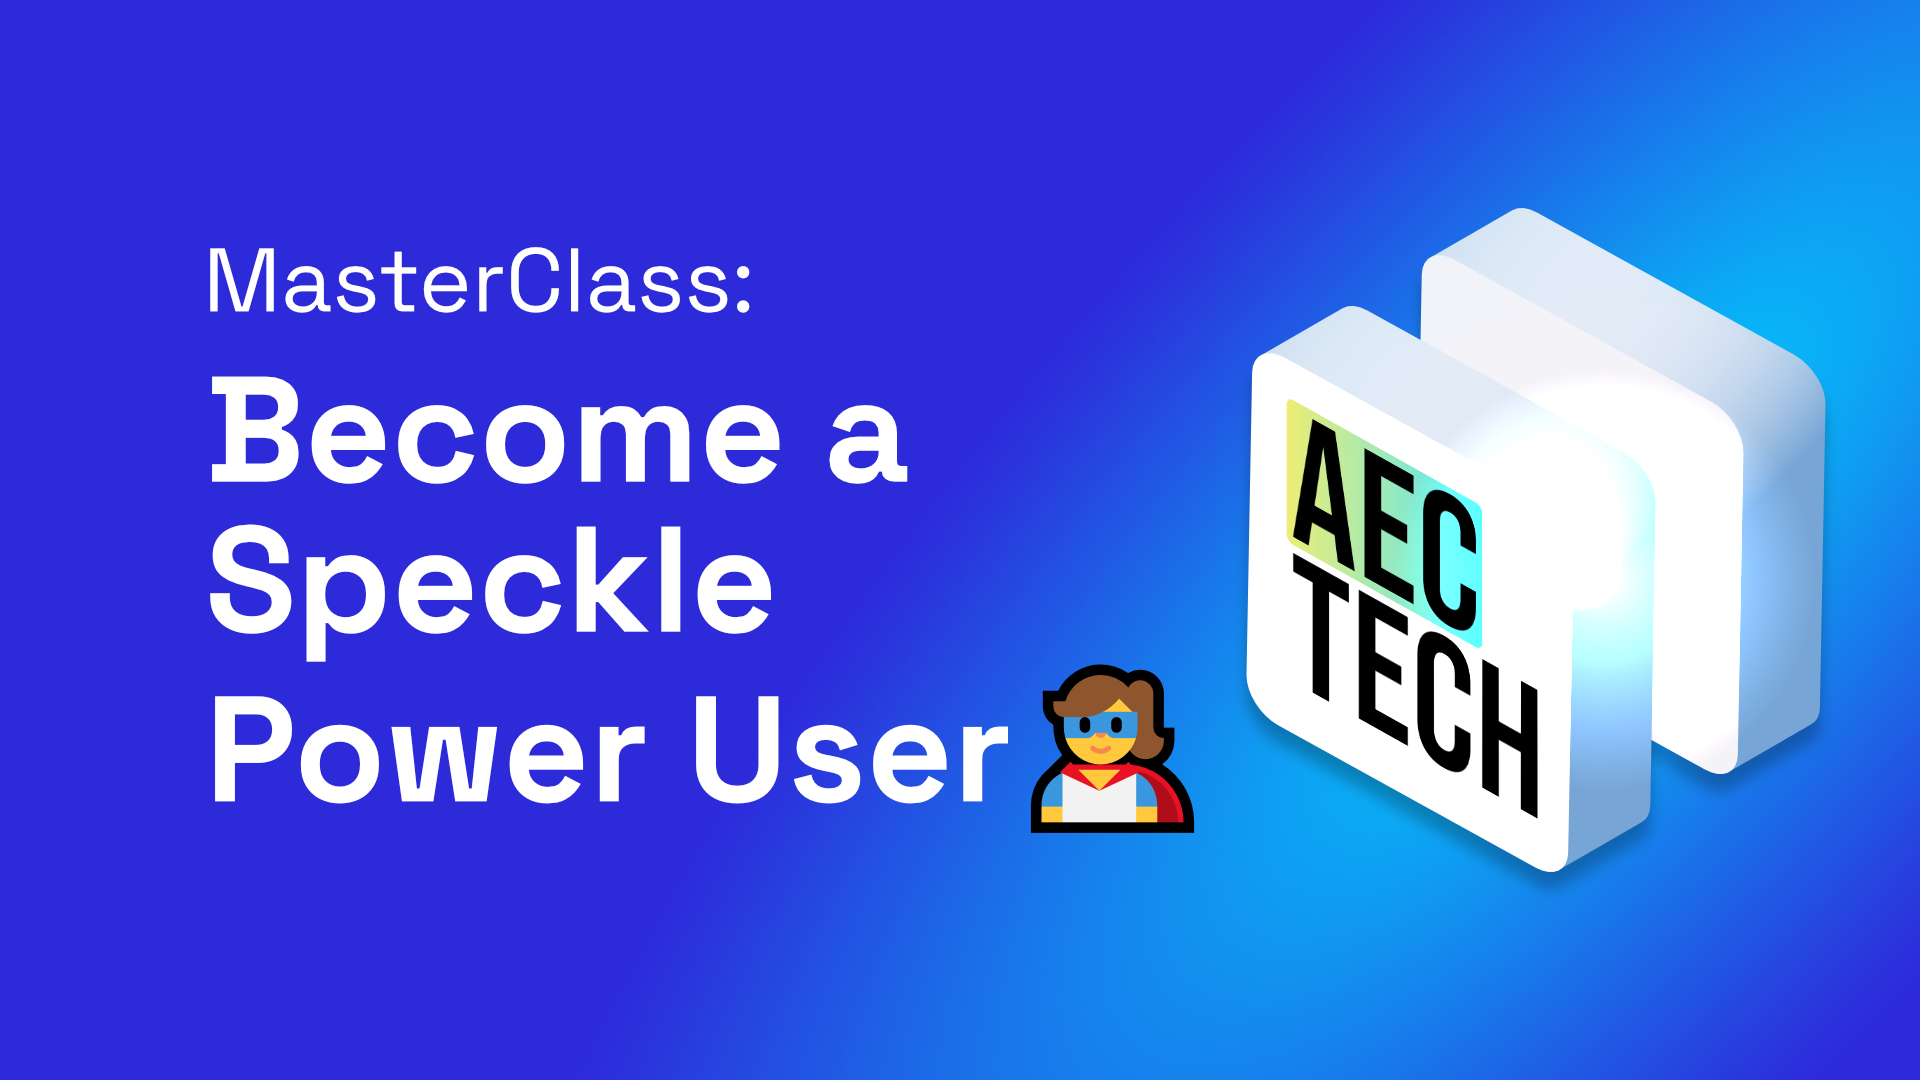 MasterClass: Become a Speckle Power User